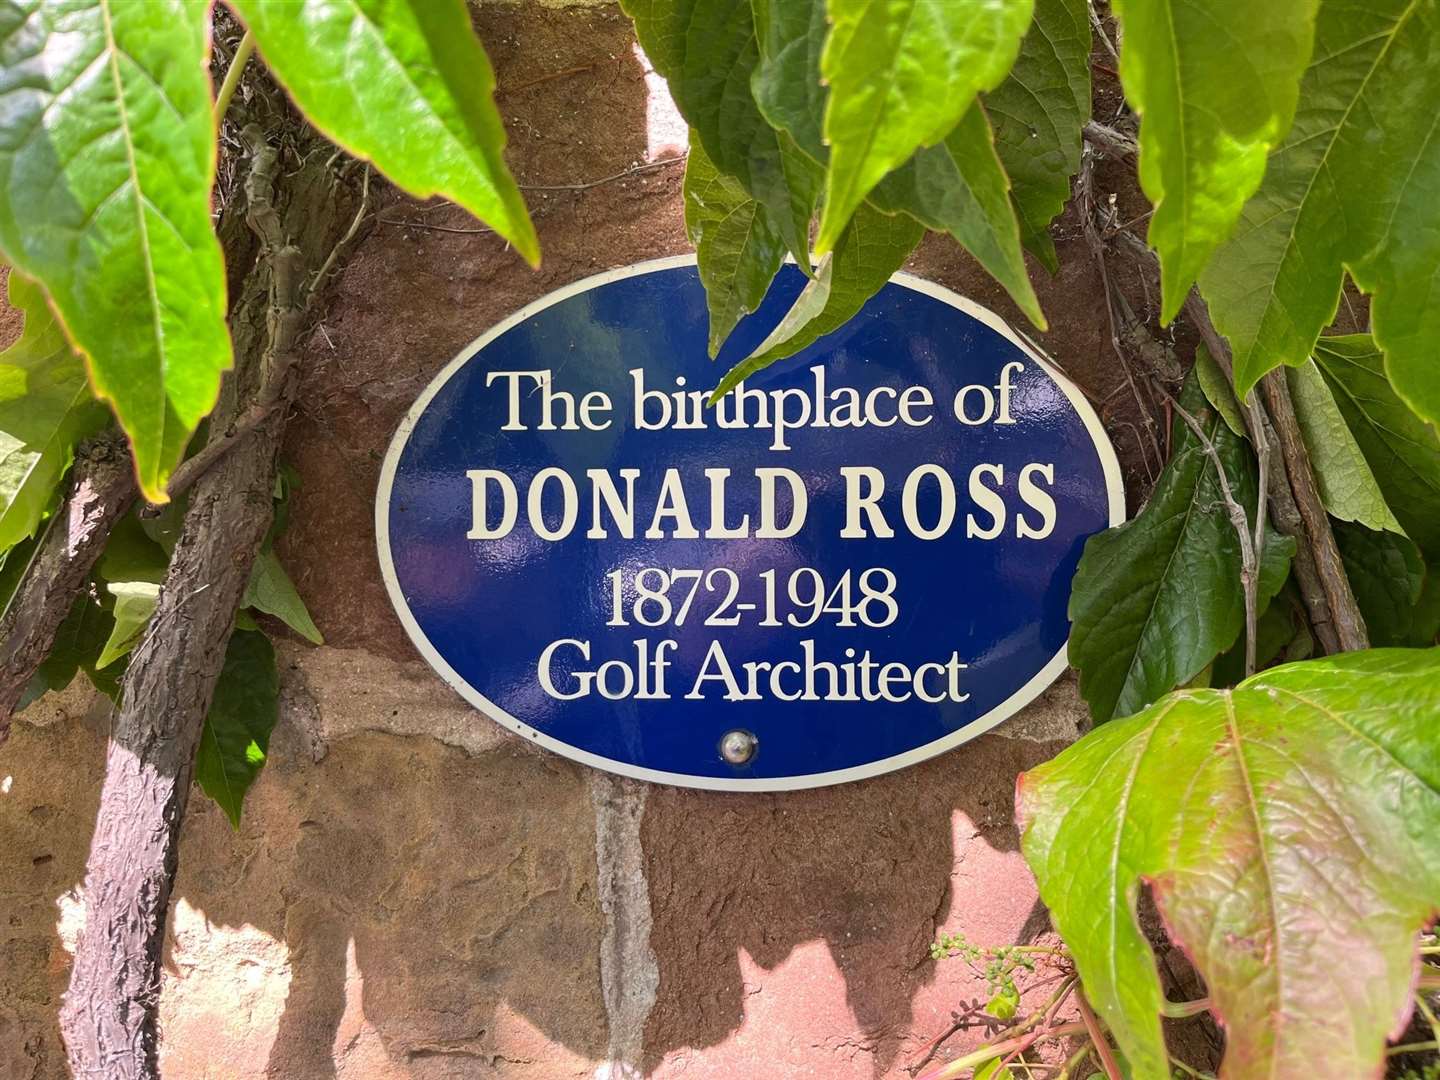 Donald Ross is celebrated for his achievements as a golf course architect.